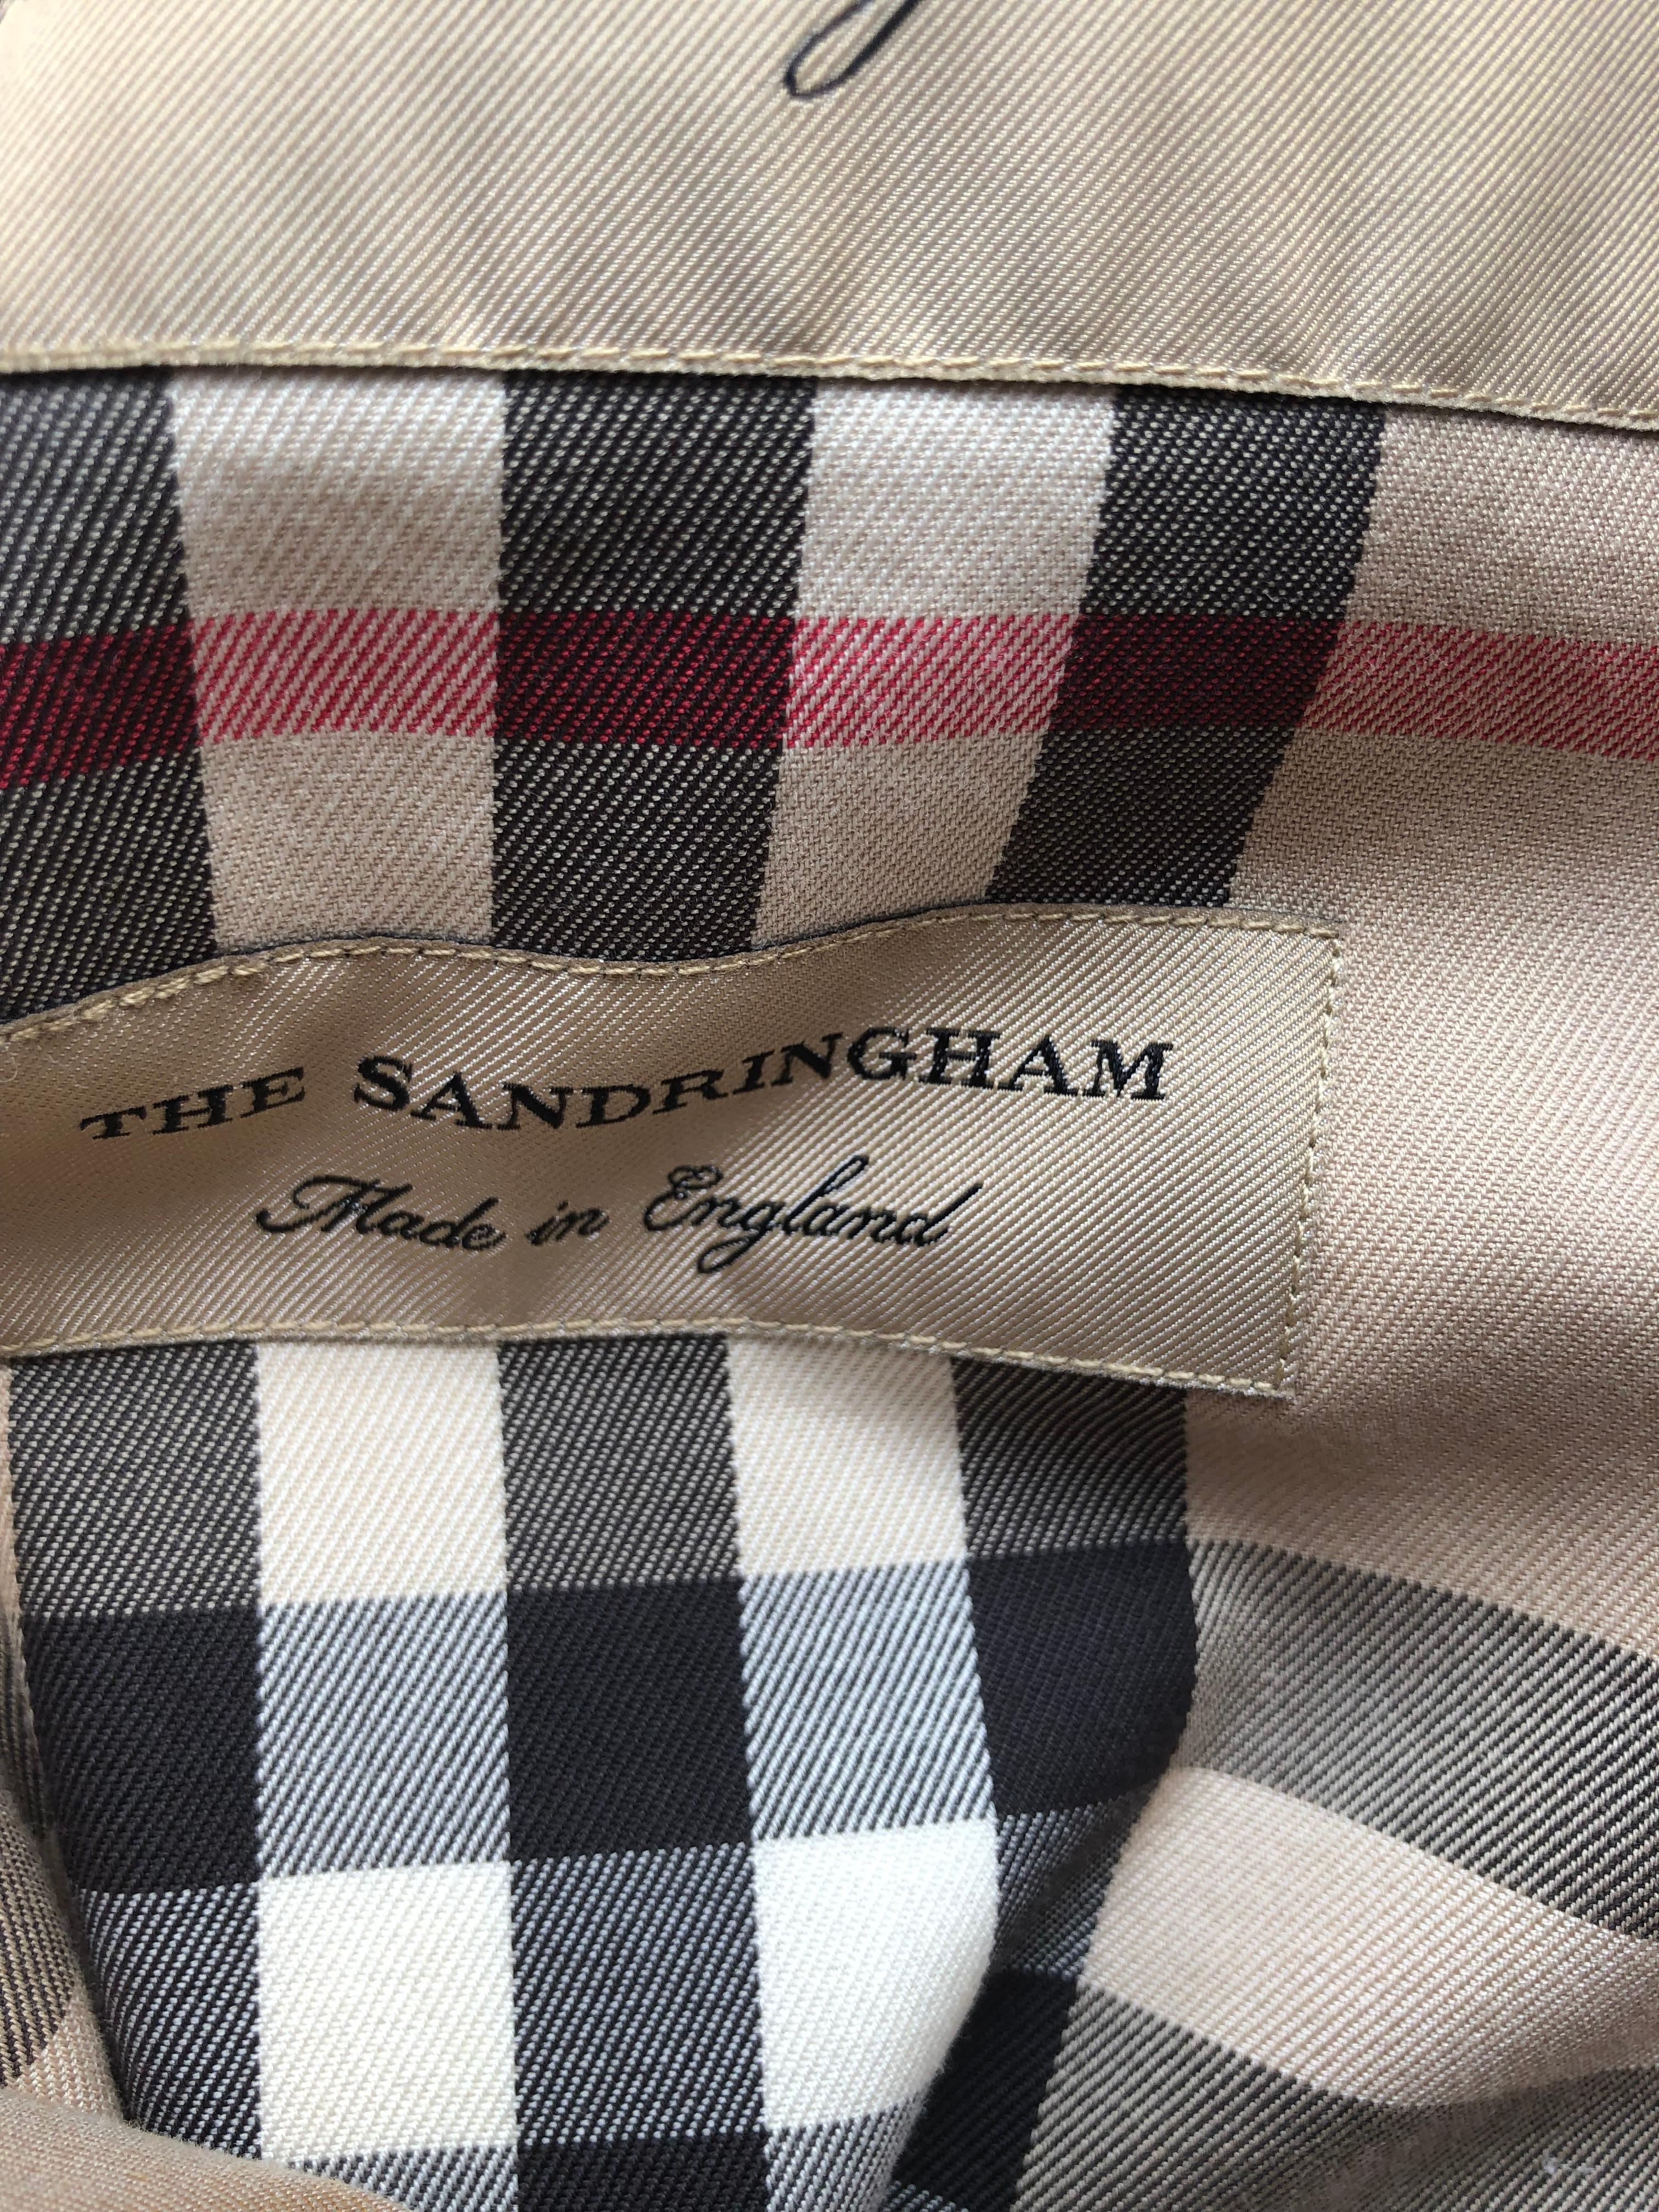 Burberry Sandringham Mid-Lenght Trench Coat 10UK 6US in Light Khaki In Excellent Condition In Port Hope, ON